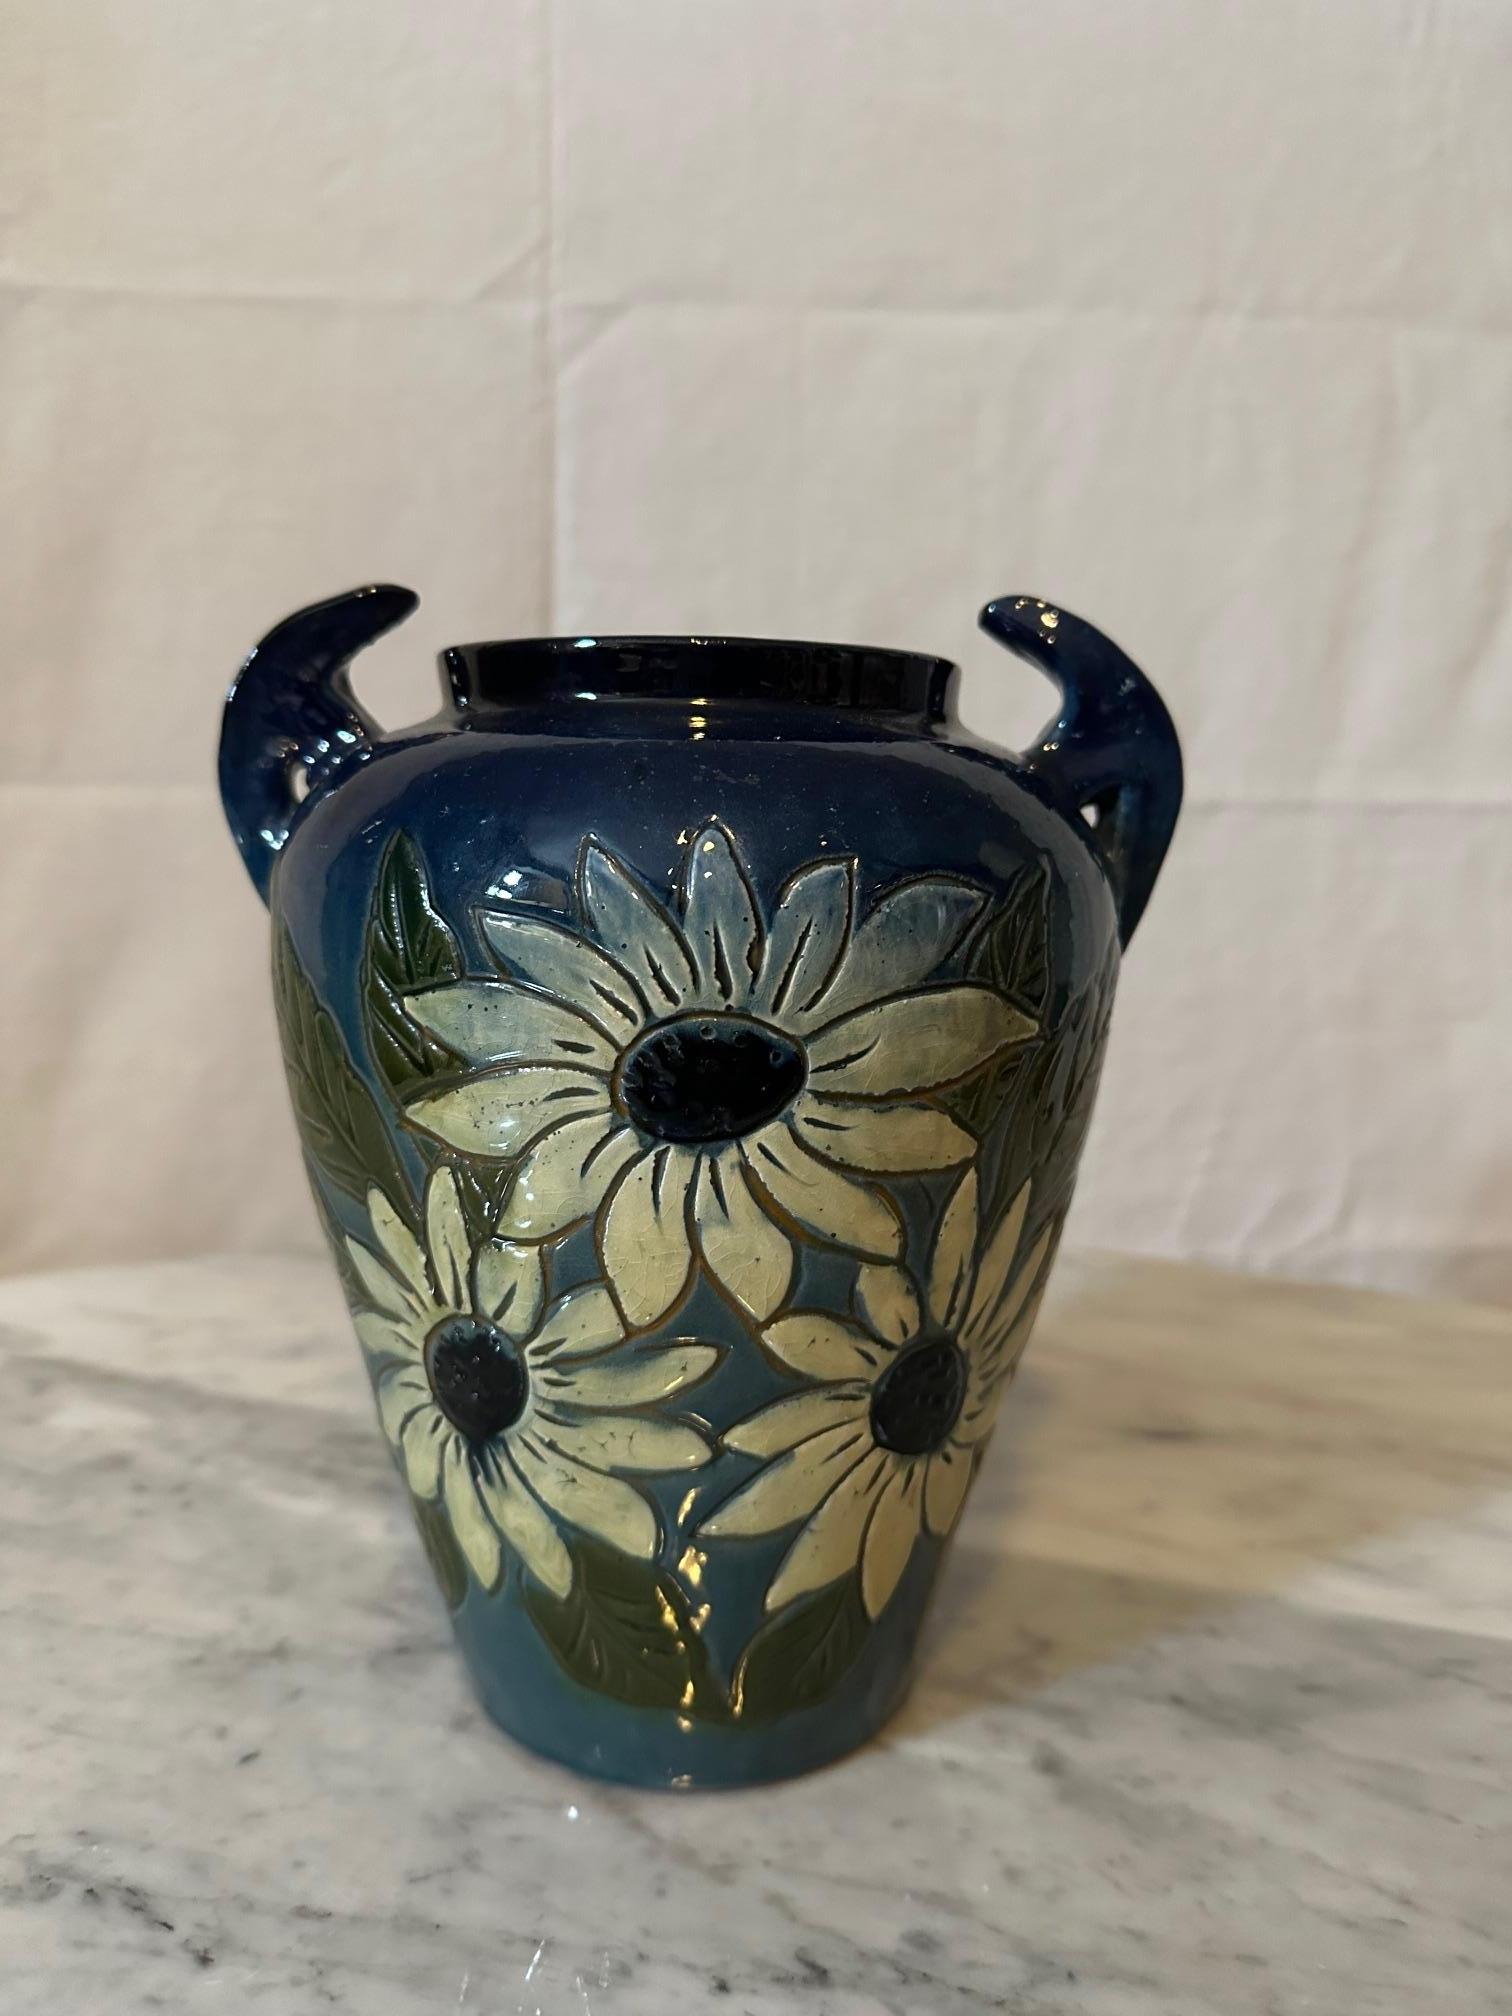 Beautiful glazed terracotta vase dating from the 1940s from Fauquet in Bonneville.
Double handles. Decorated with white flowers and green foliage on a blue background.
Beautiful quality and very good condition.